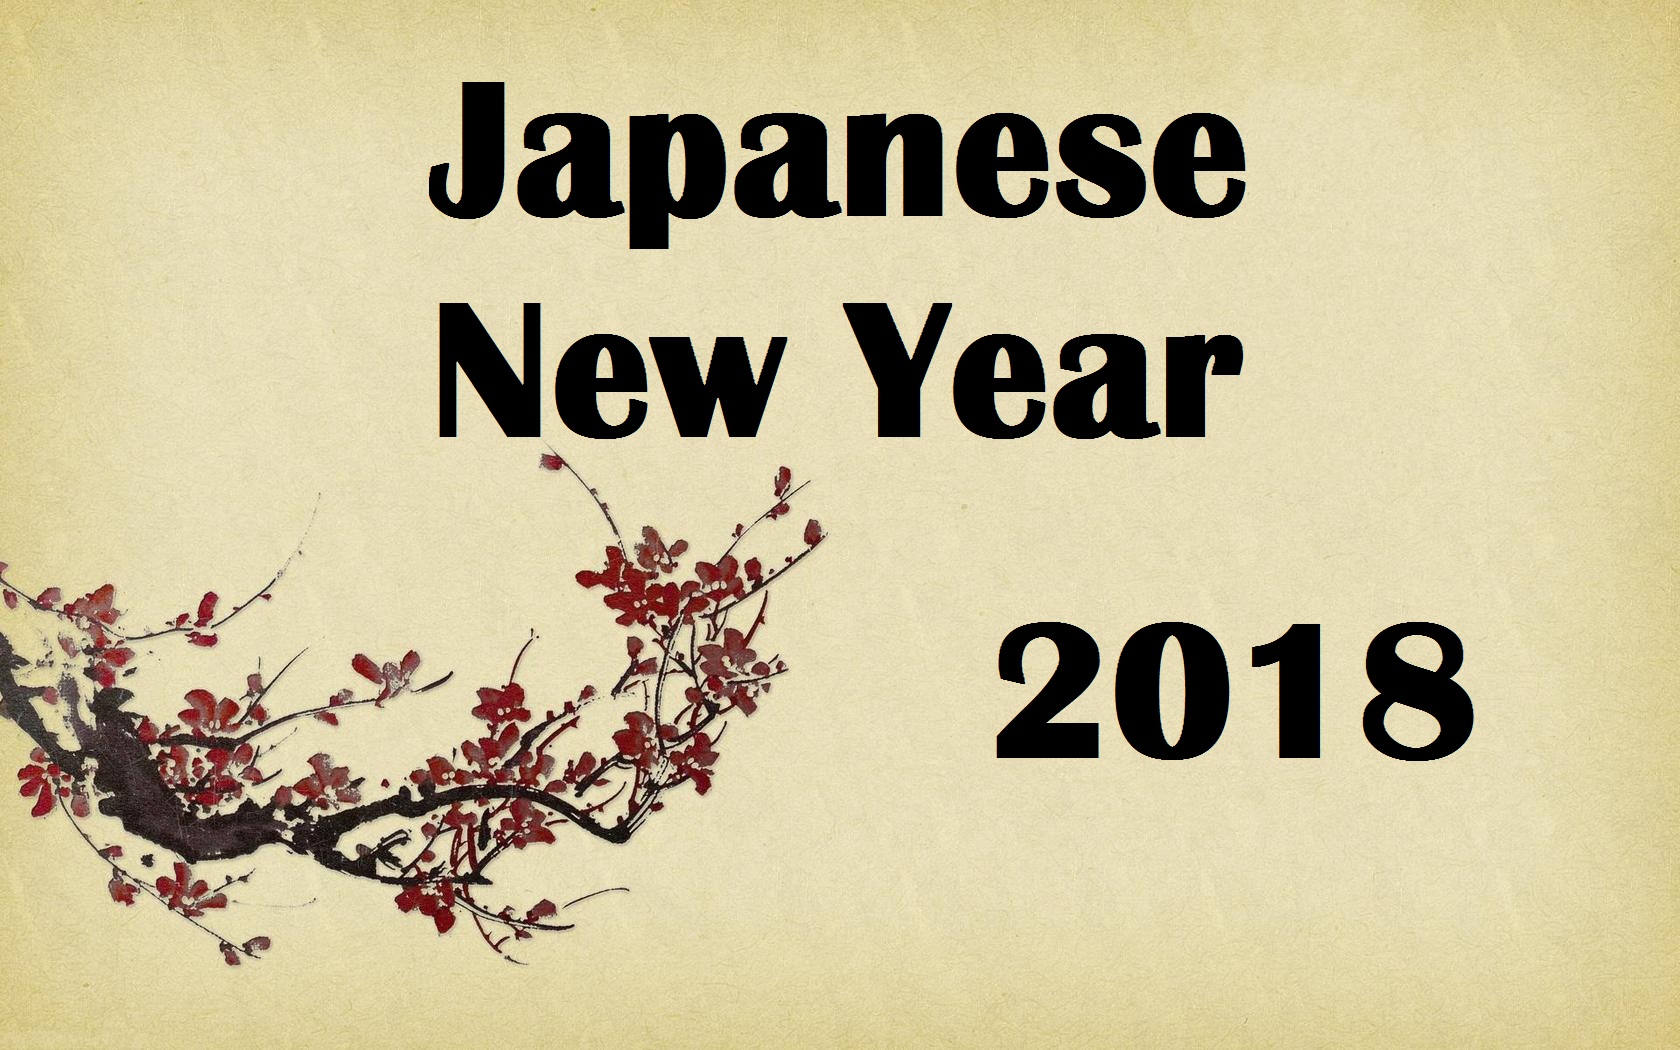 japanese-New-Year-2018-Hd-Images-Wallpapers-Backgrounds